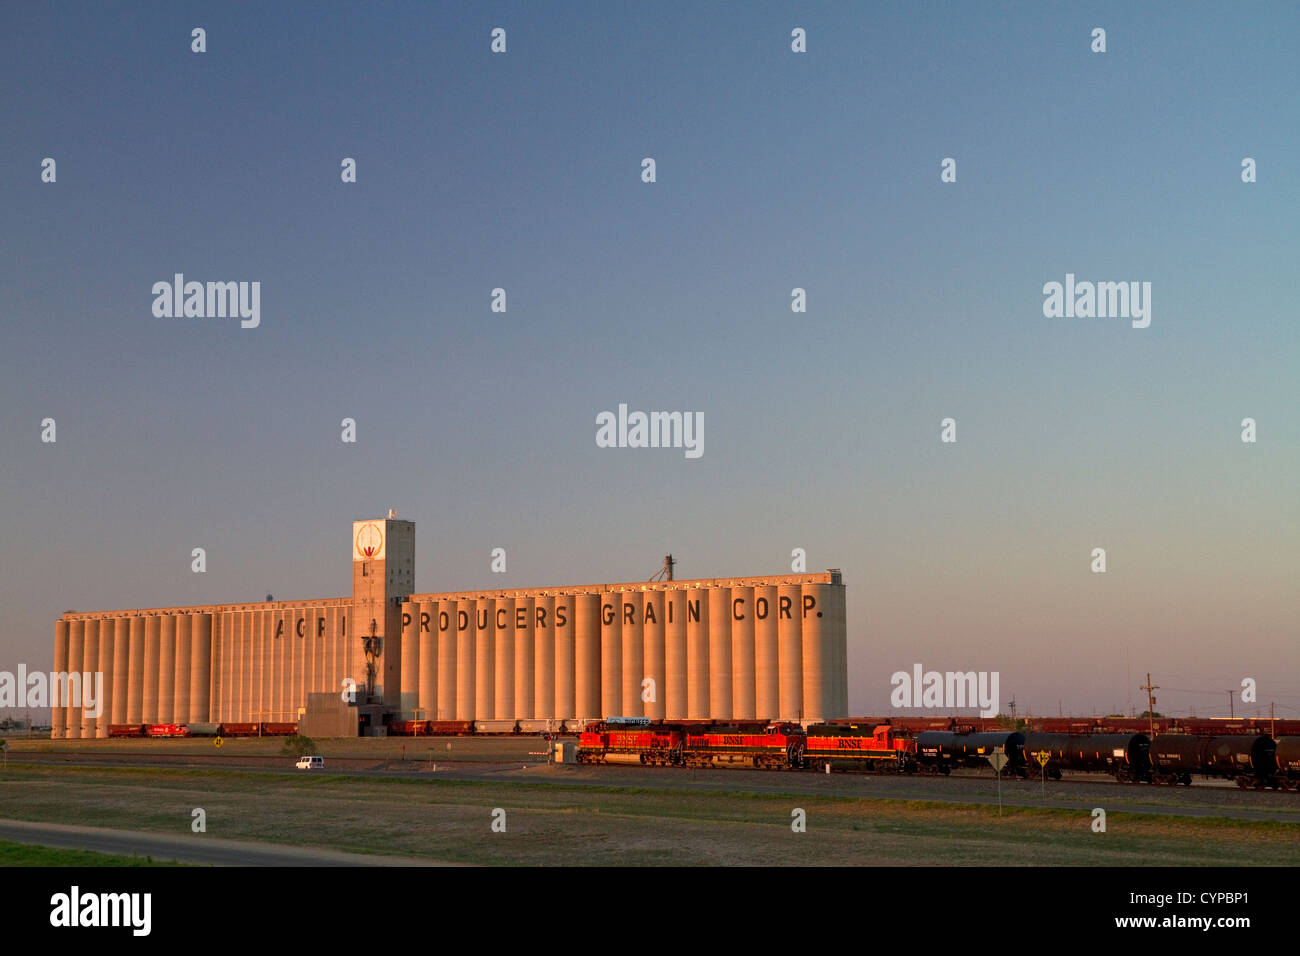 BNSF Railway train in front of the Agri Producers Grain Corp grain elevators at Plainview, Texas, USA. Stock Photo